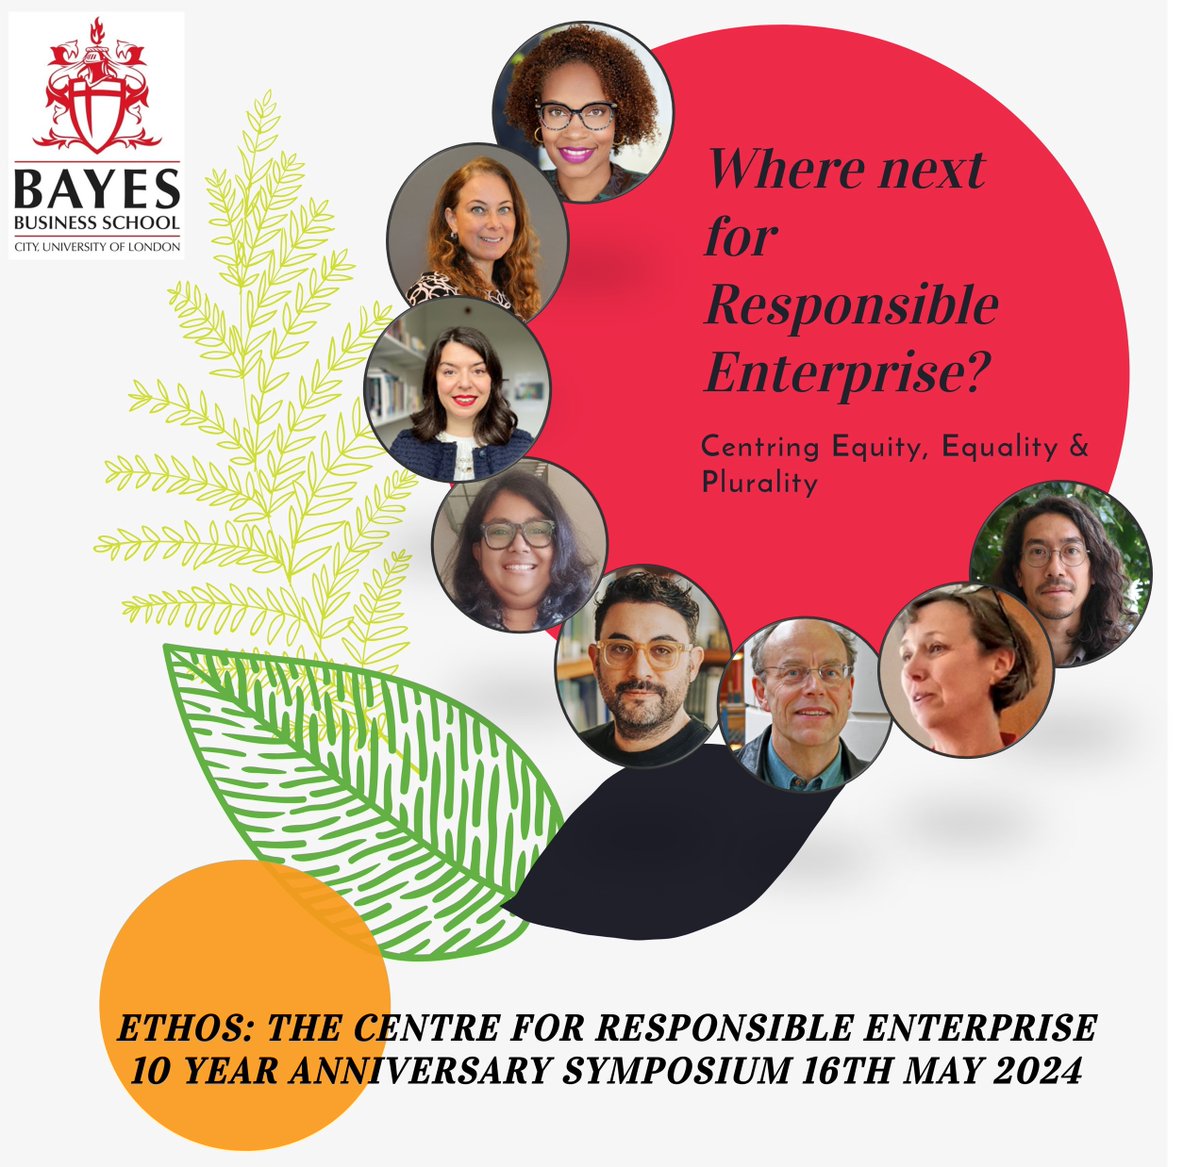 Join us for our free 10 year anniversary symposium! Centring #equity, #equality & #plurality in responsible enterprise research & practice. 🗓️16th May 2024 @BayesBusiness, London, UK. ✏️Register here: tinyurl.com/4a8hu8ck Keynotes from @Nolywe_ & @banupan. 1/4